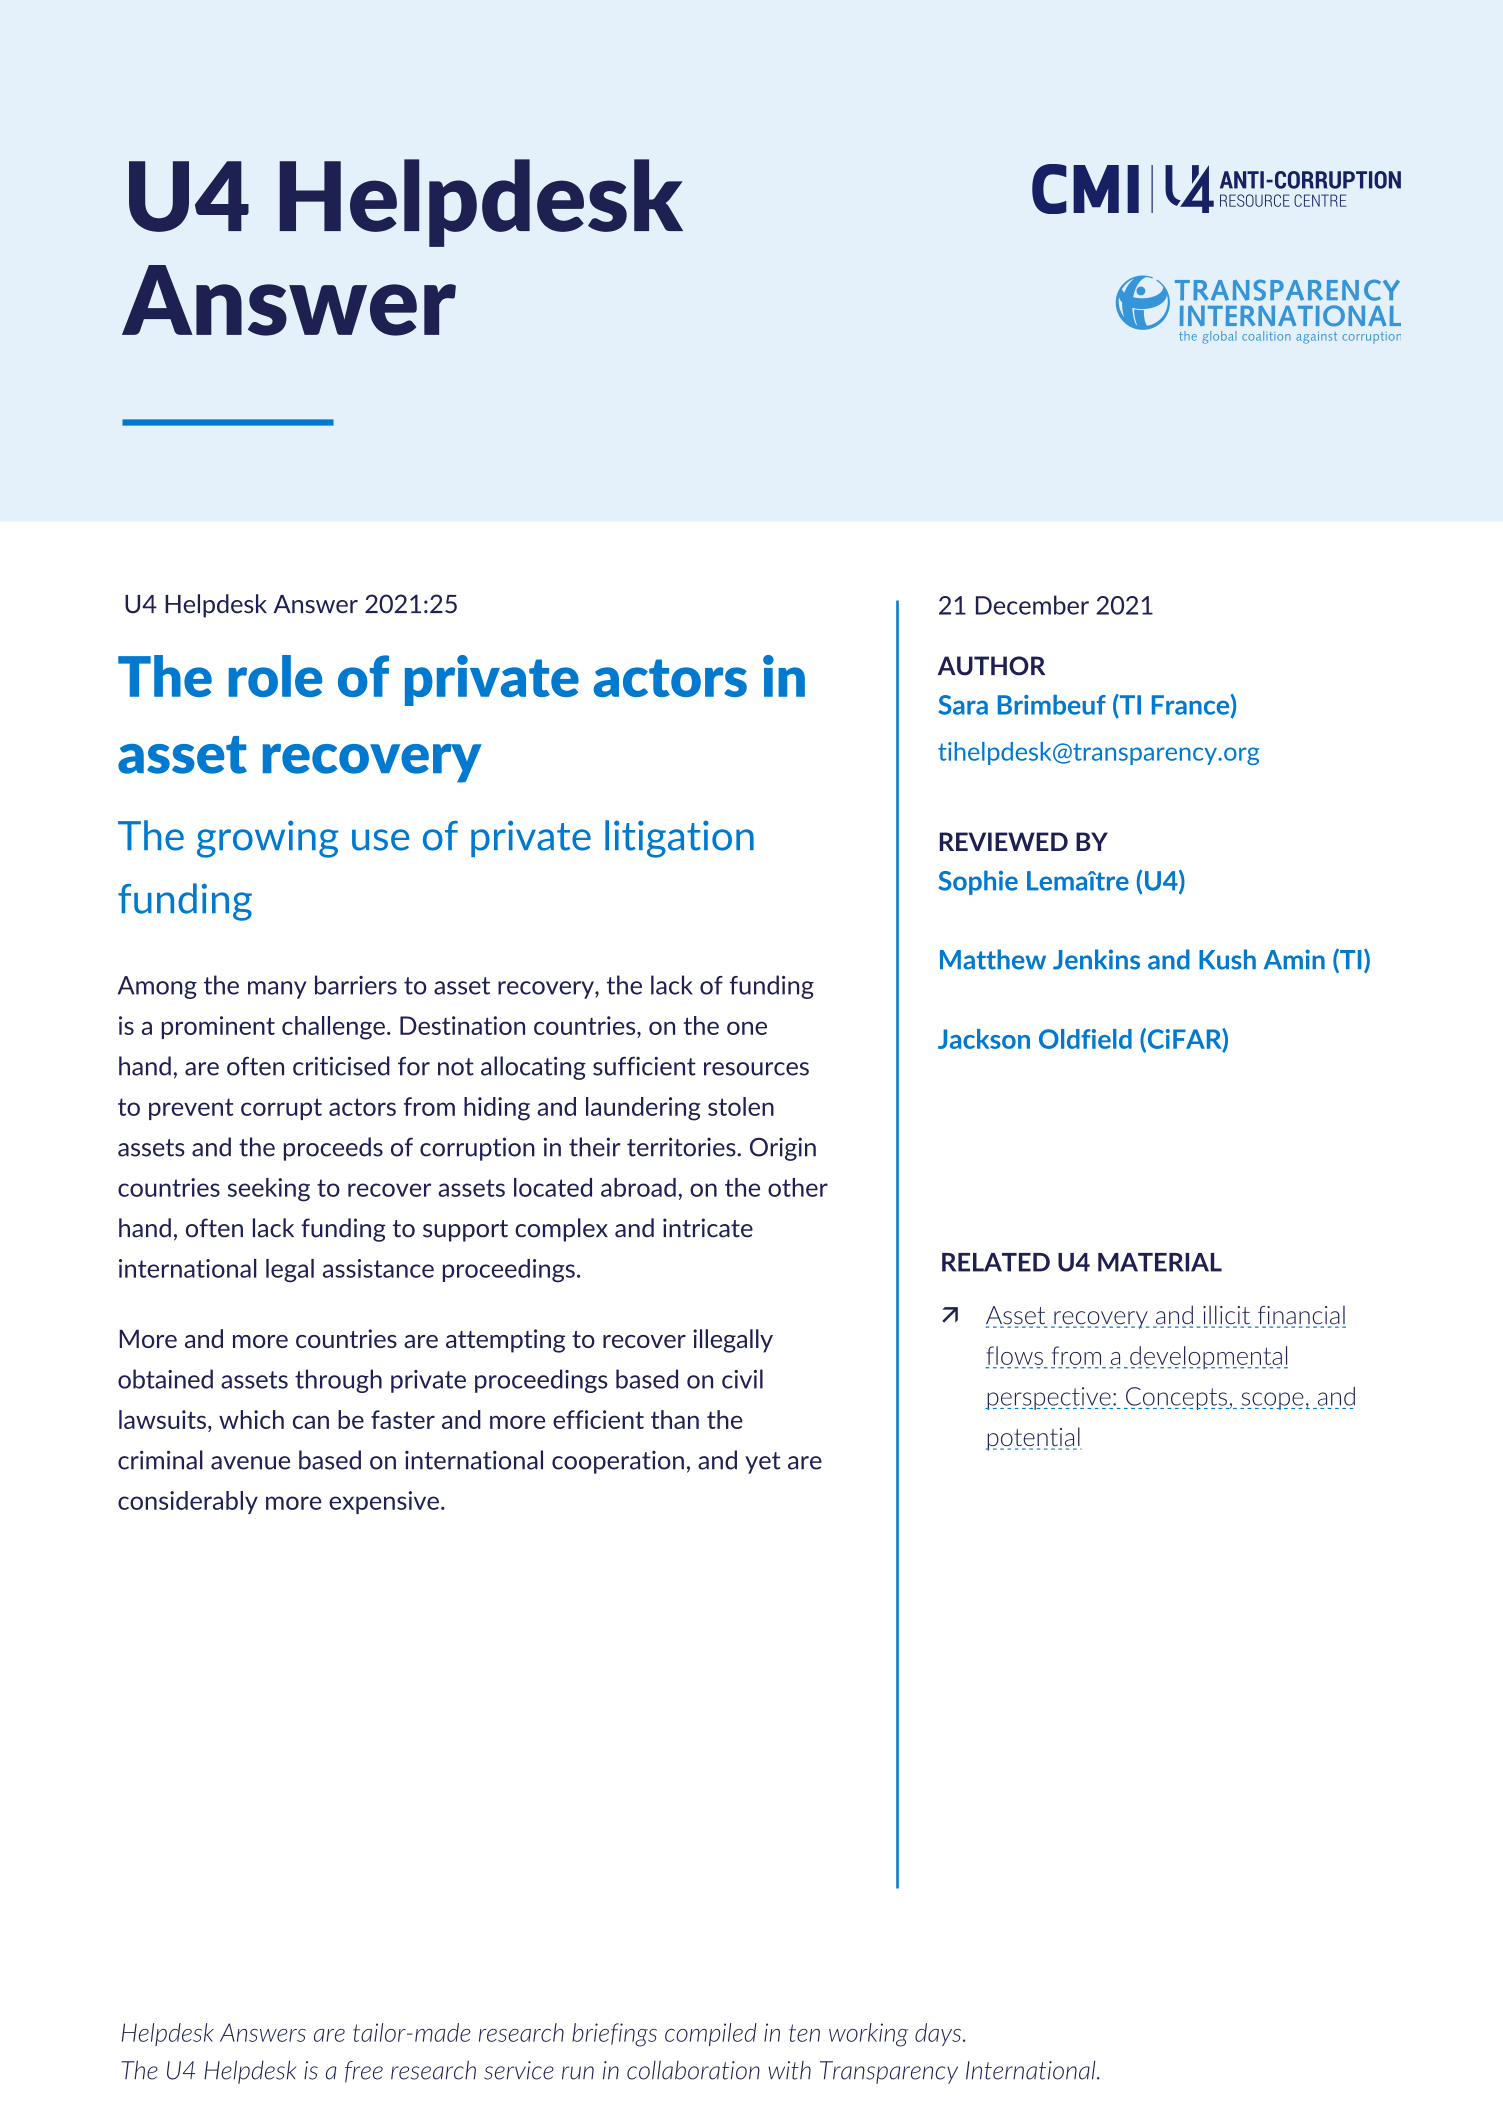 The role of private actors in asset recovery